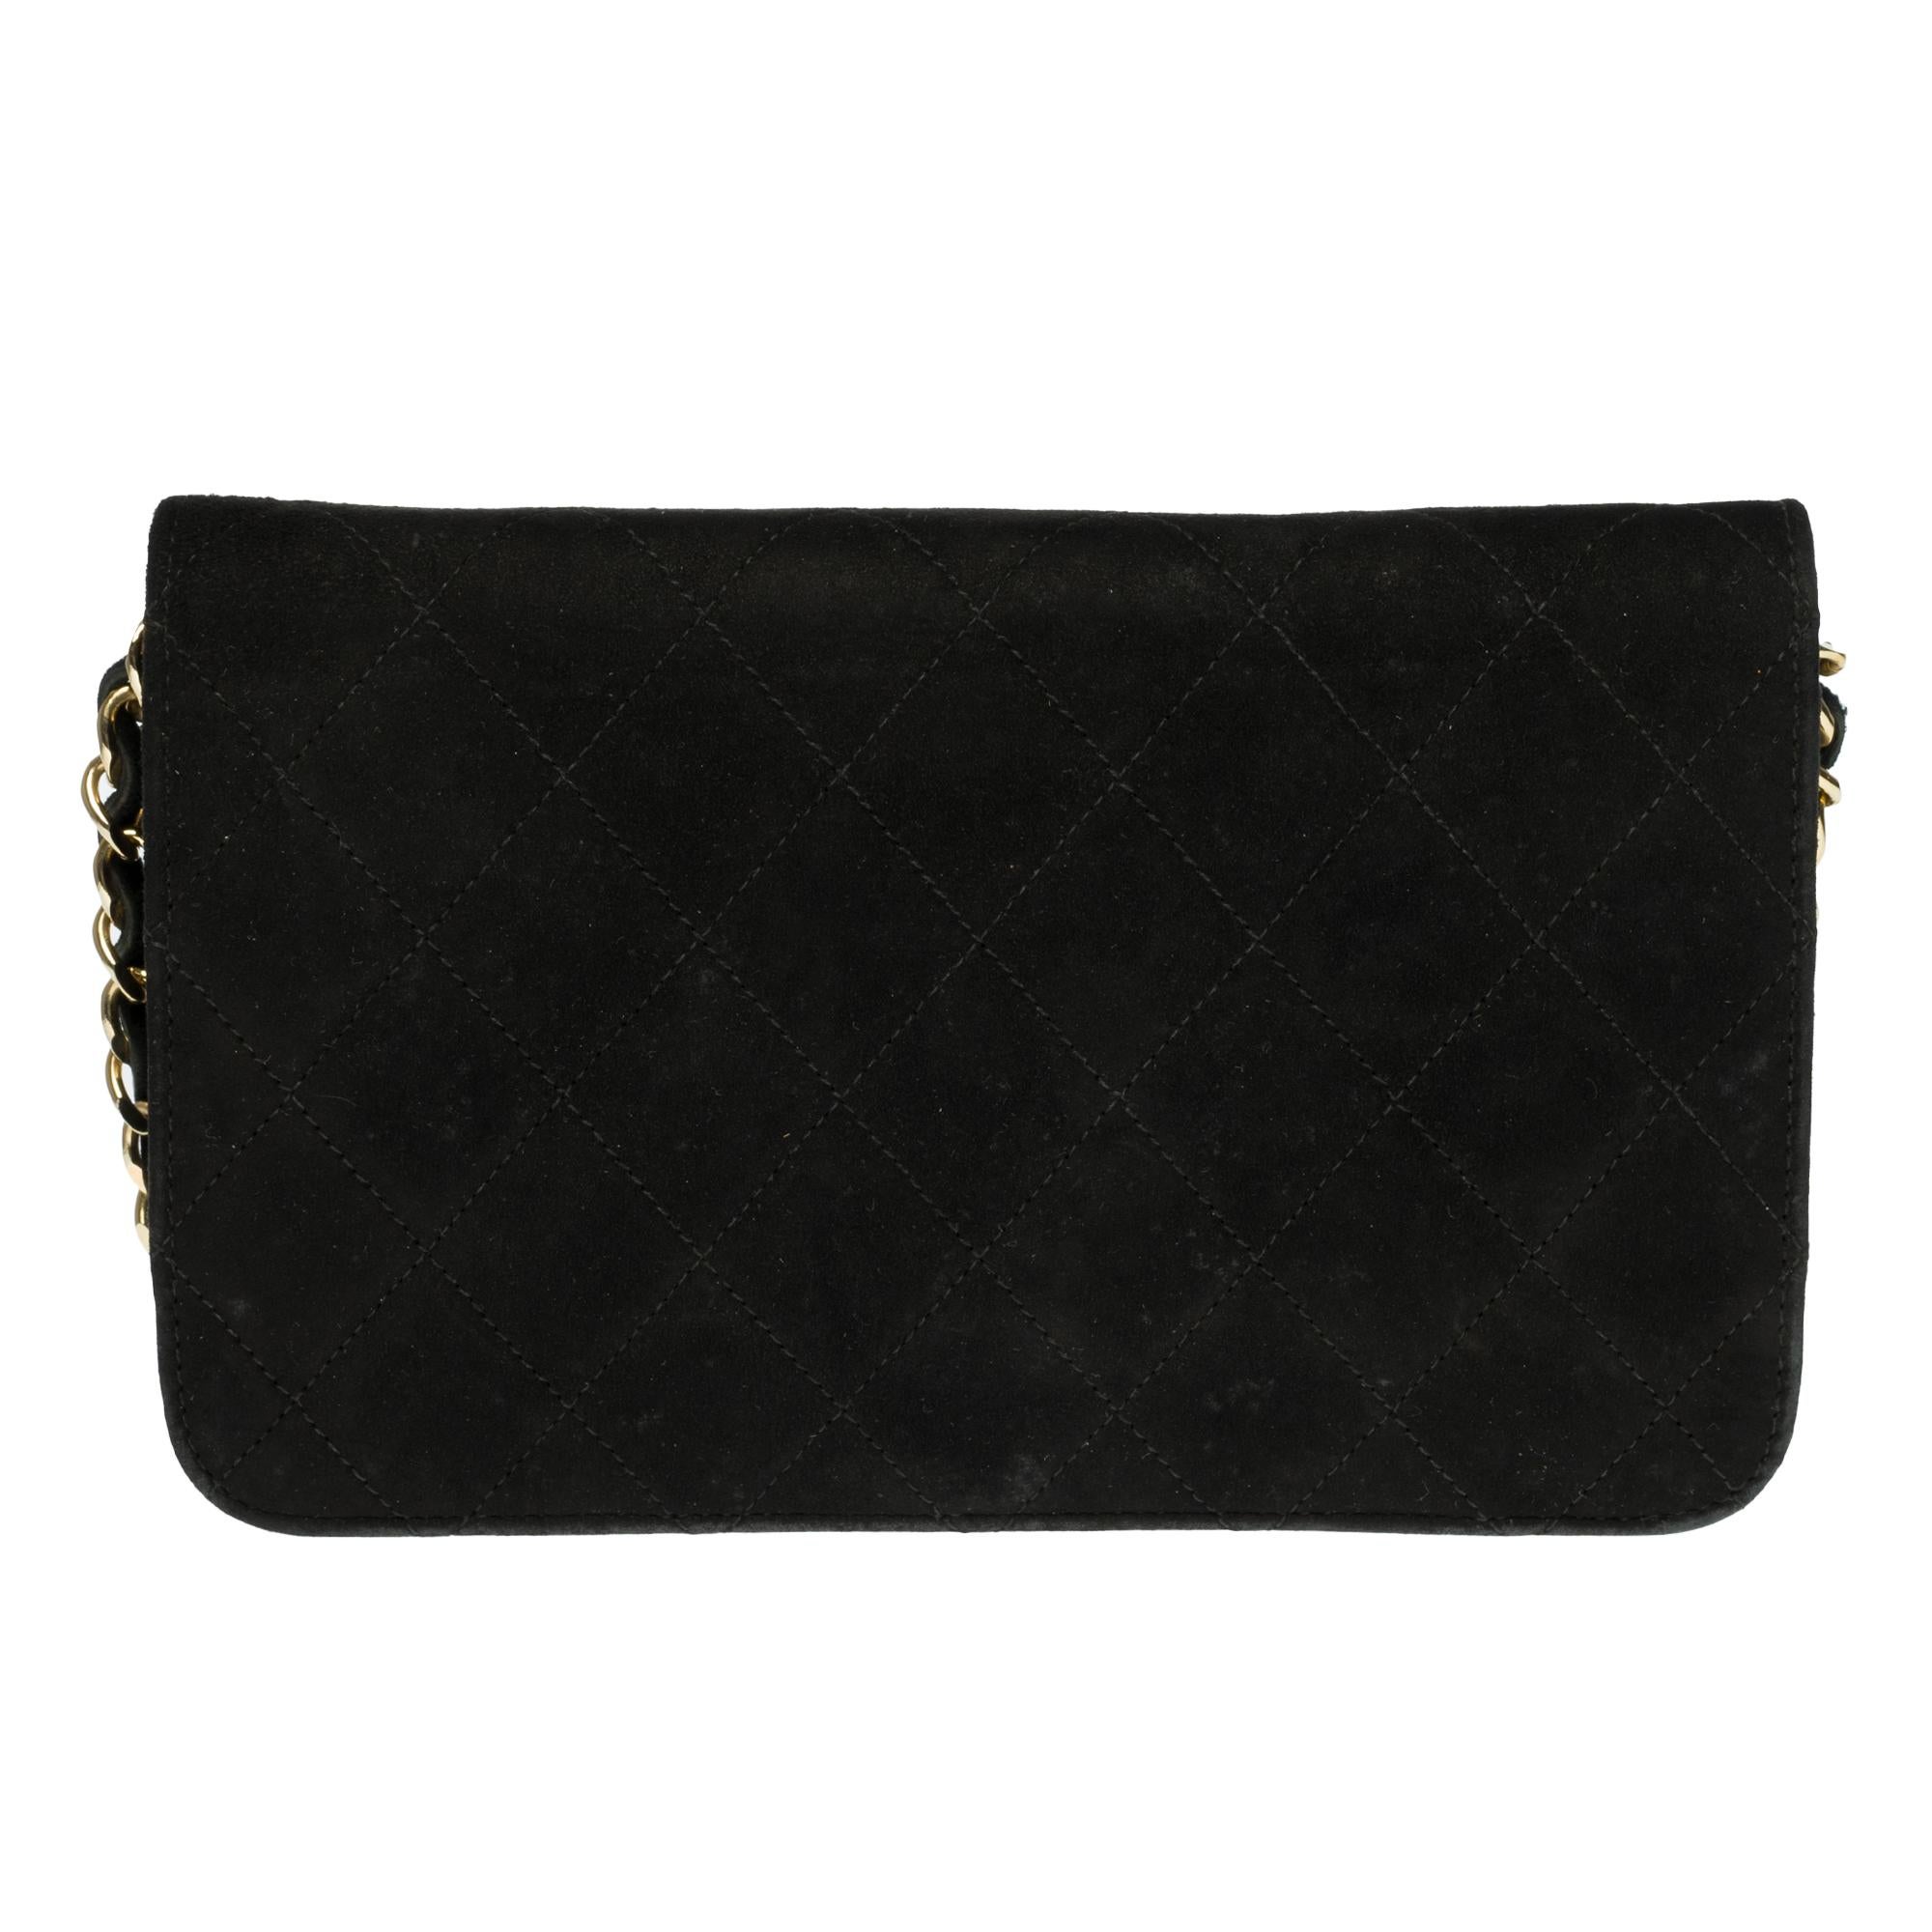 Very pretty & Cute Chanel Classic Mini full flap bag in black quilted suede, gold-tone metal hardware, gold-tone metal chain intertwined with black suede for a hand or shoulder stand.
Flap closure, gold-tone CC logo clasp.
Lining in red leather, 1